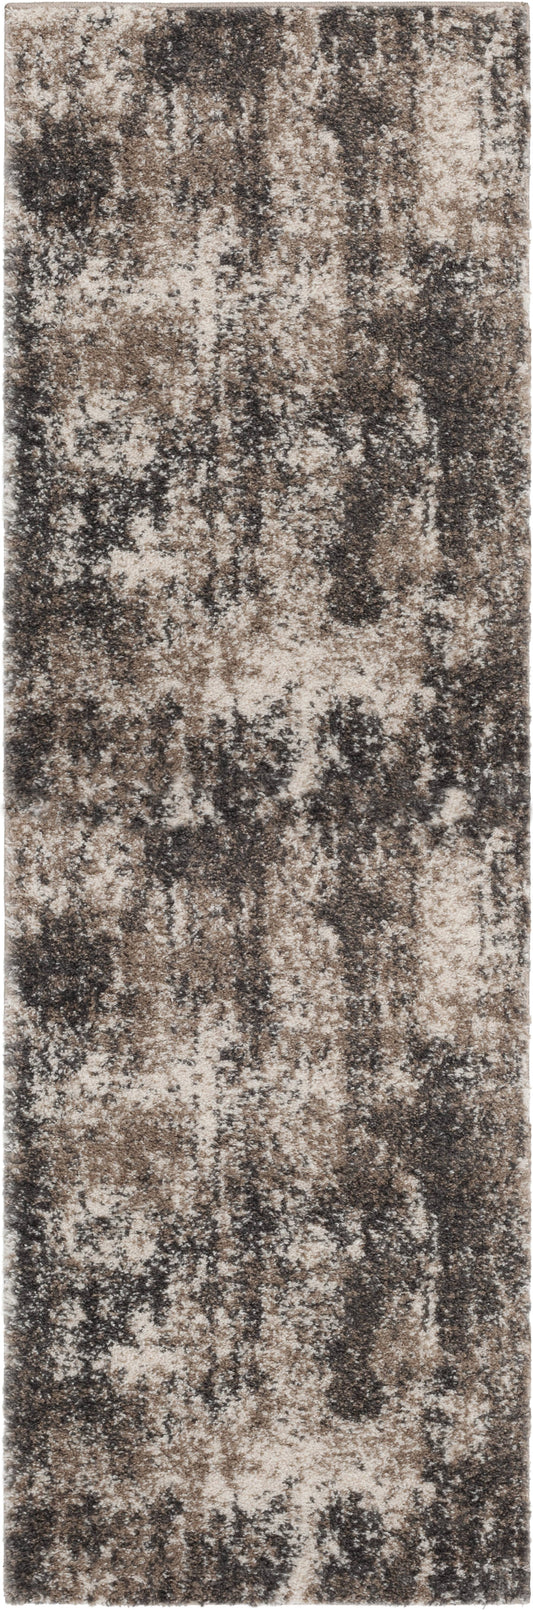 Abstract Shag Indoor Area Rug Neutral 22x60 Inches